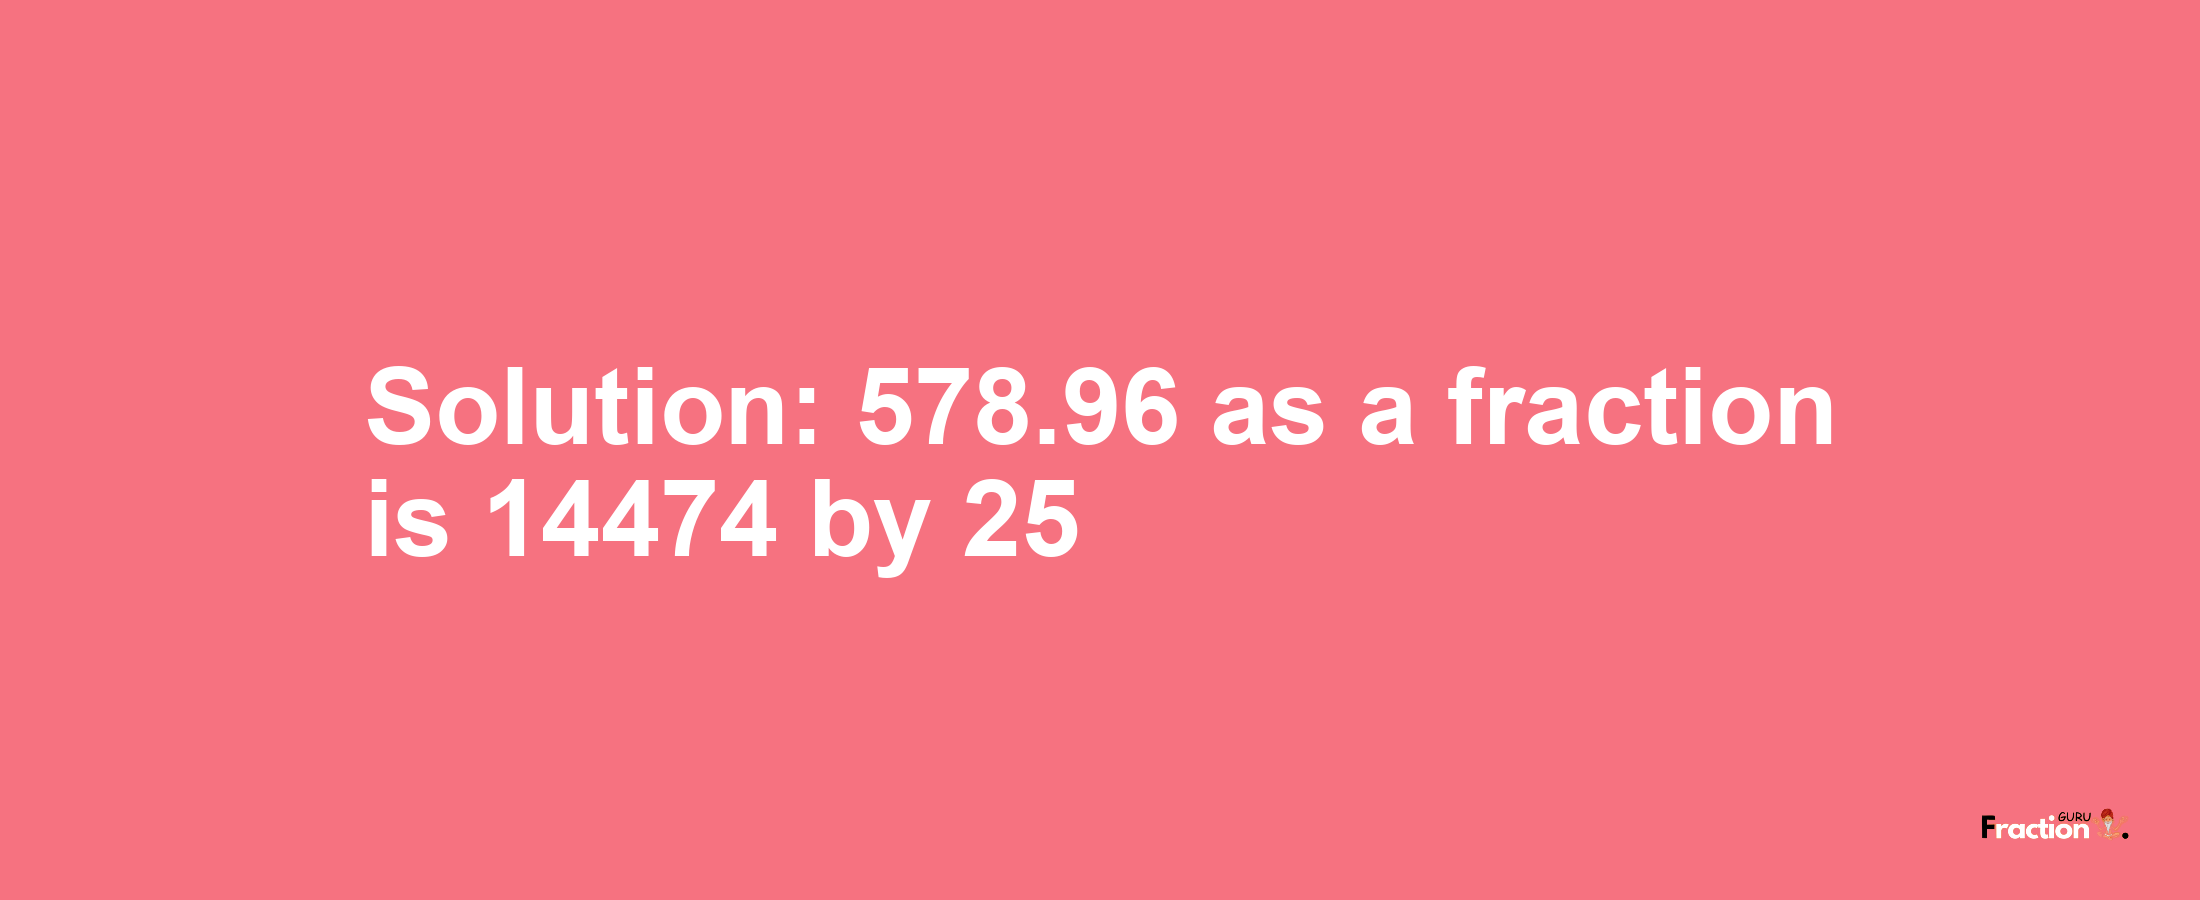 Solution:578.96 as a fraction is 14474/25